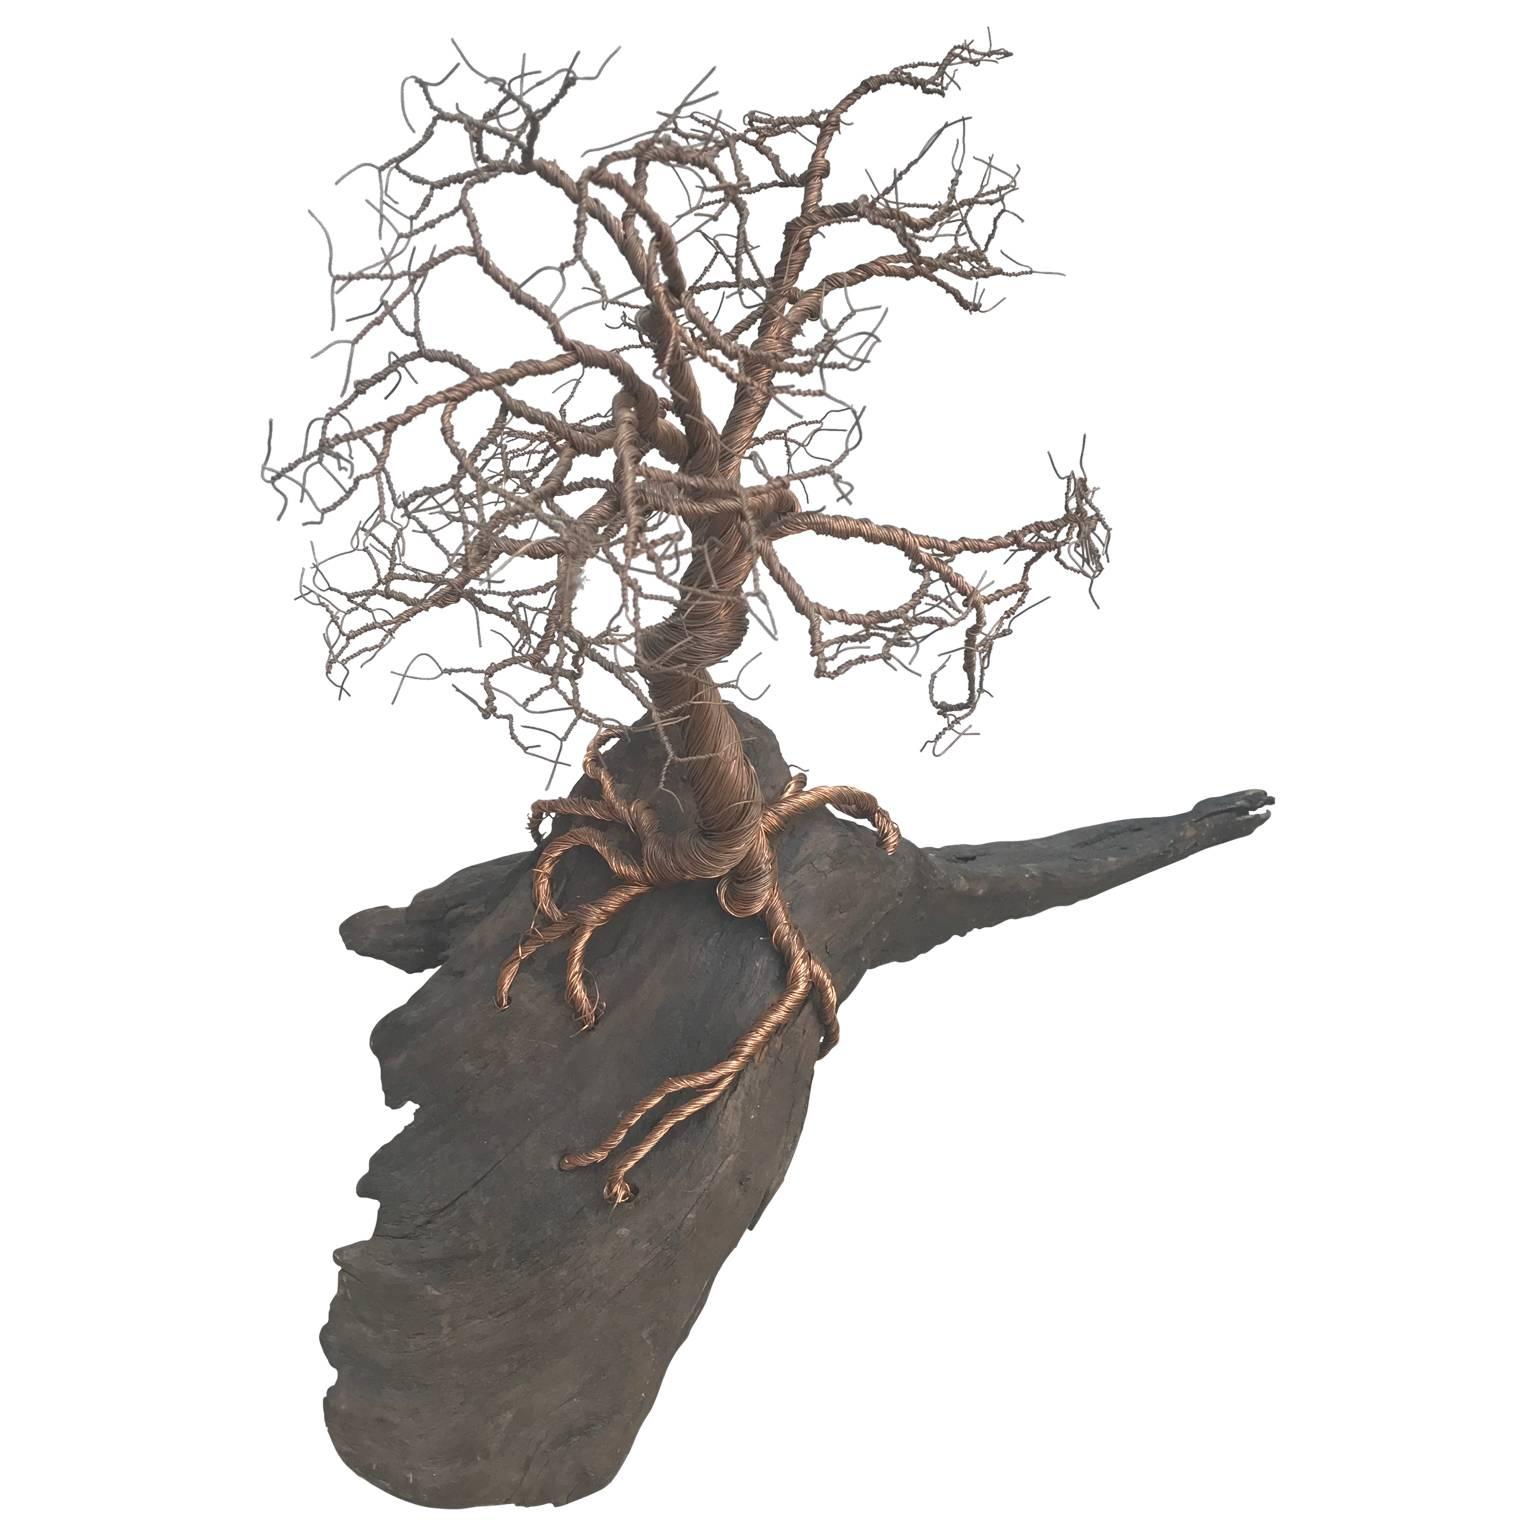 Mid-Century Modern gilded wire sculpture on a large driftwood base by Mauricio Santelice. This piece is an interesting table sculpture; the driftwood base holds the life-like tree figure. The modern earthy design is timeless and will compliment any